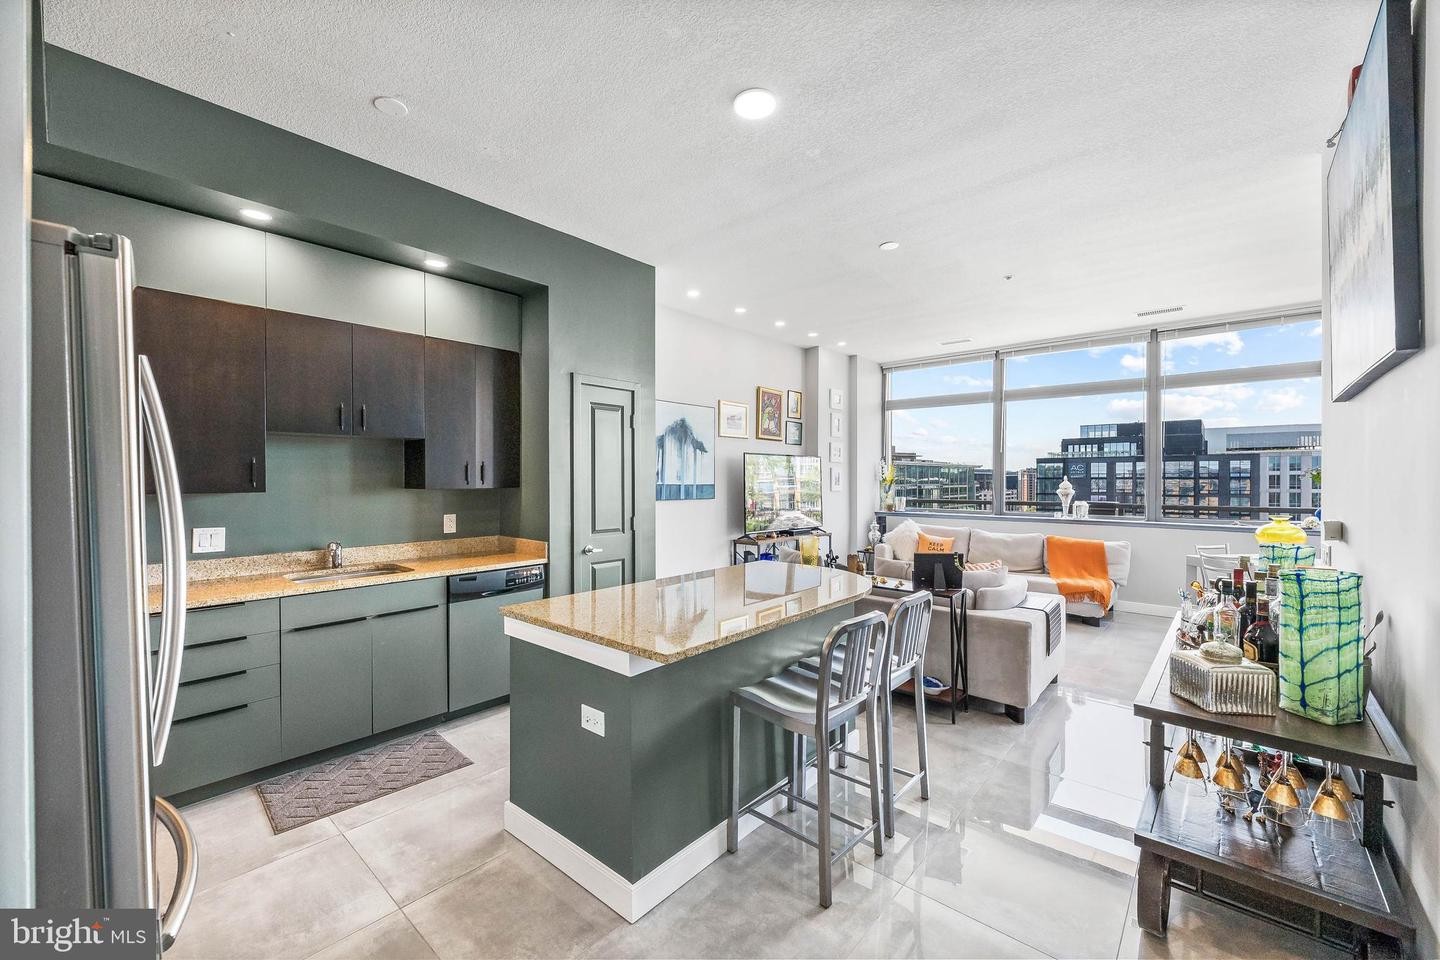 4. 475 K St NW 